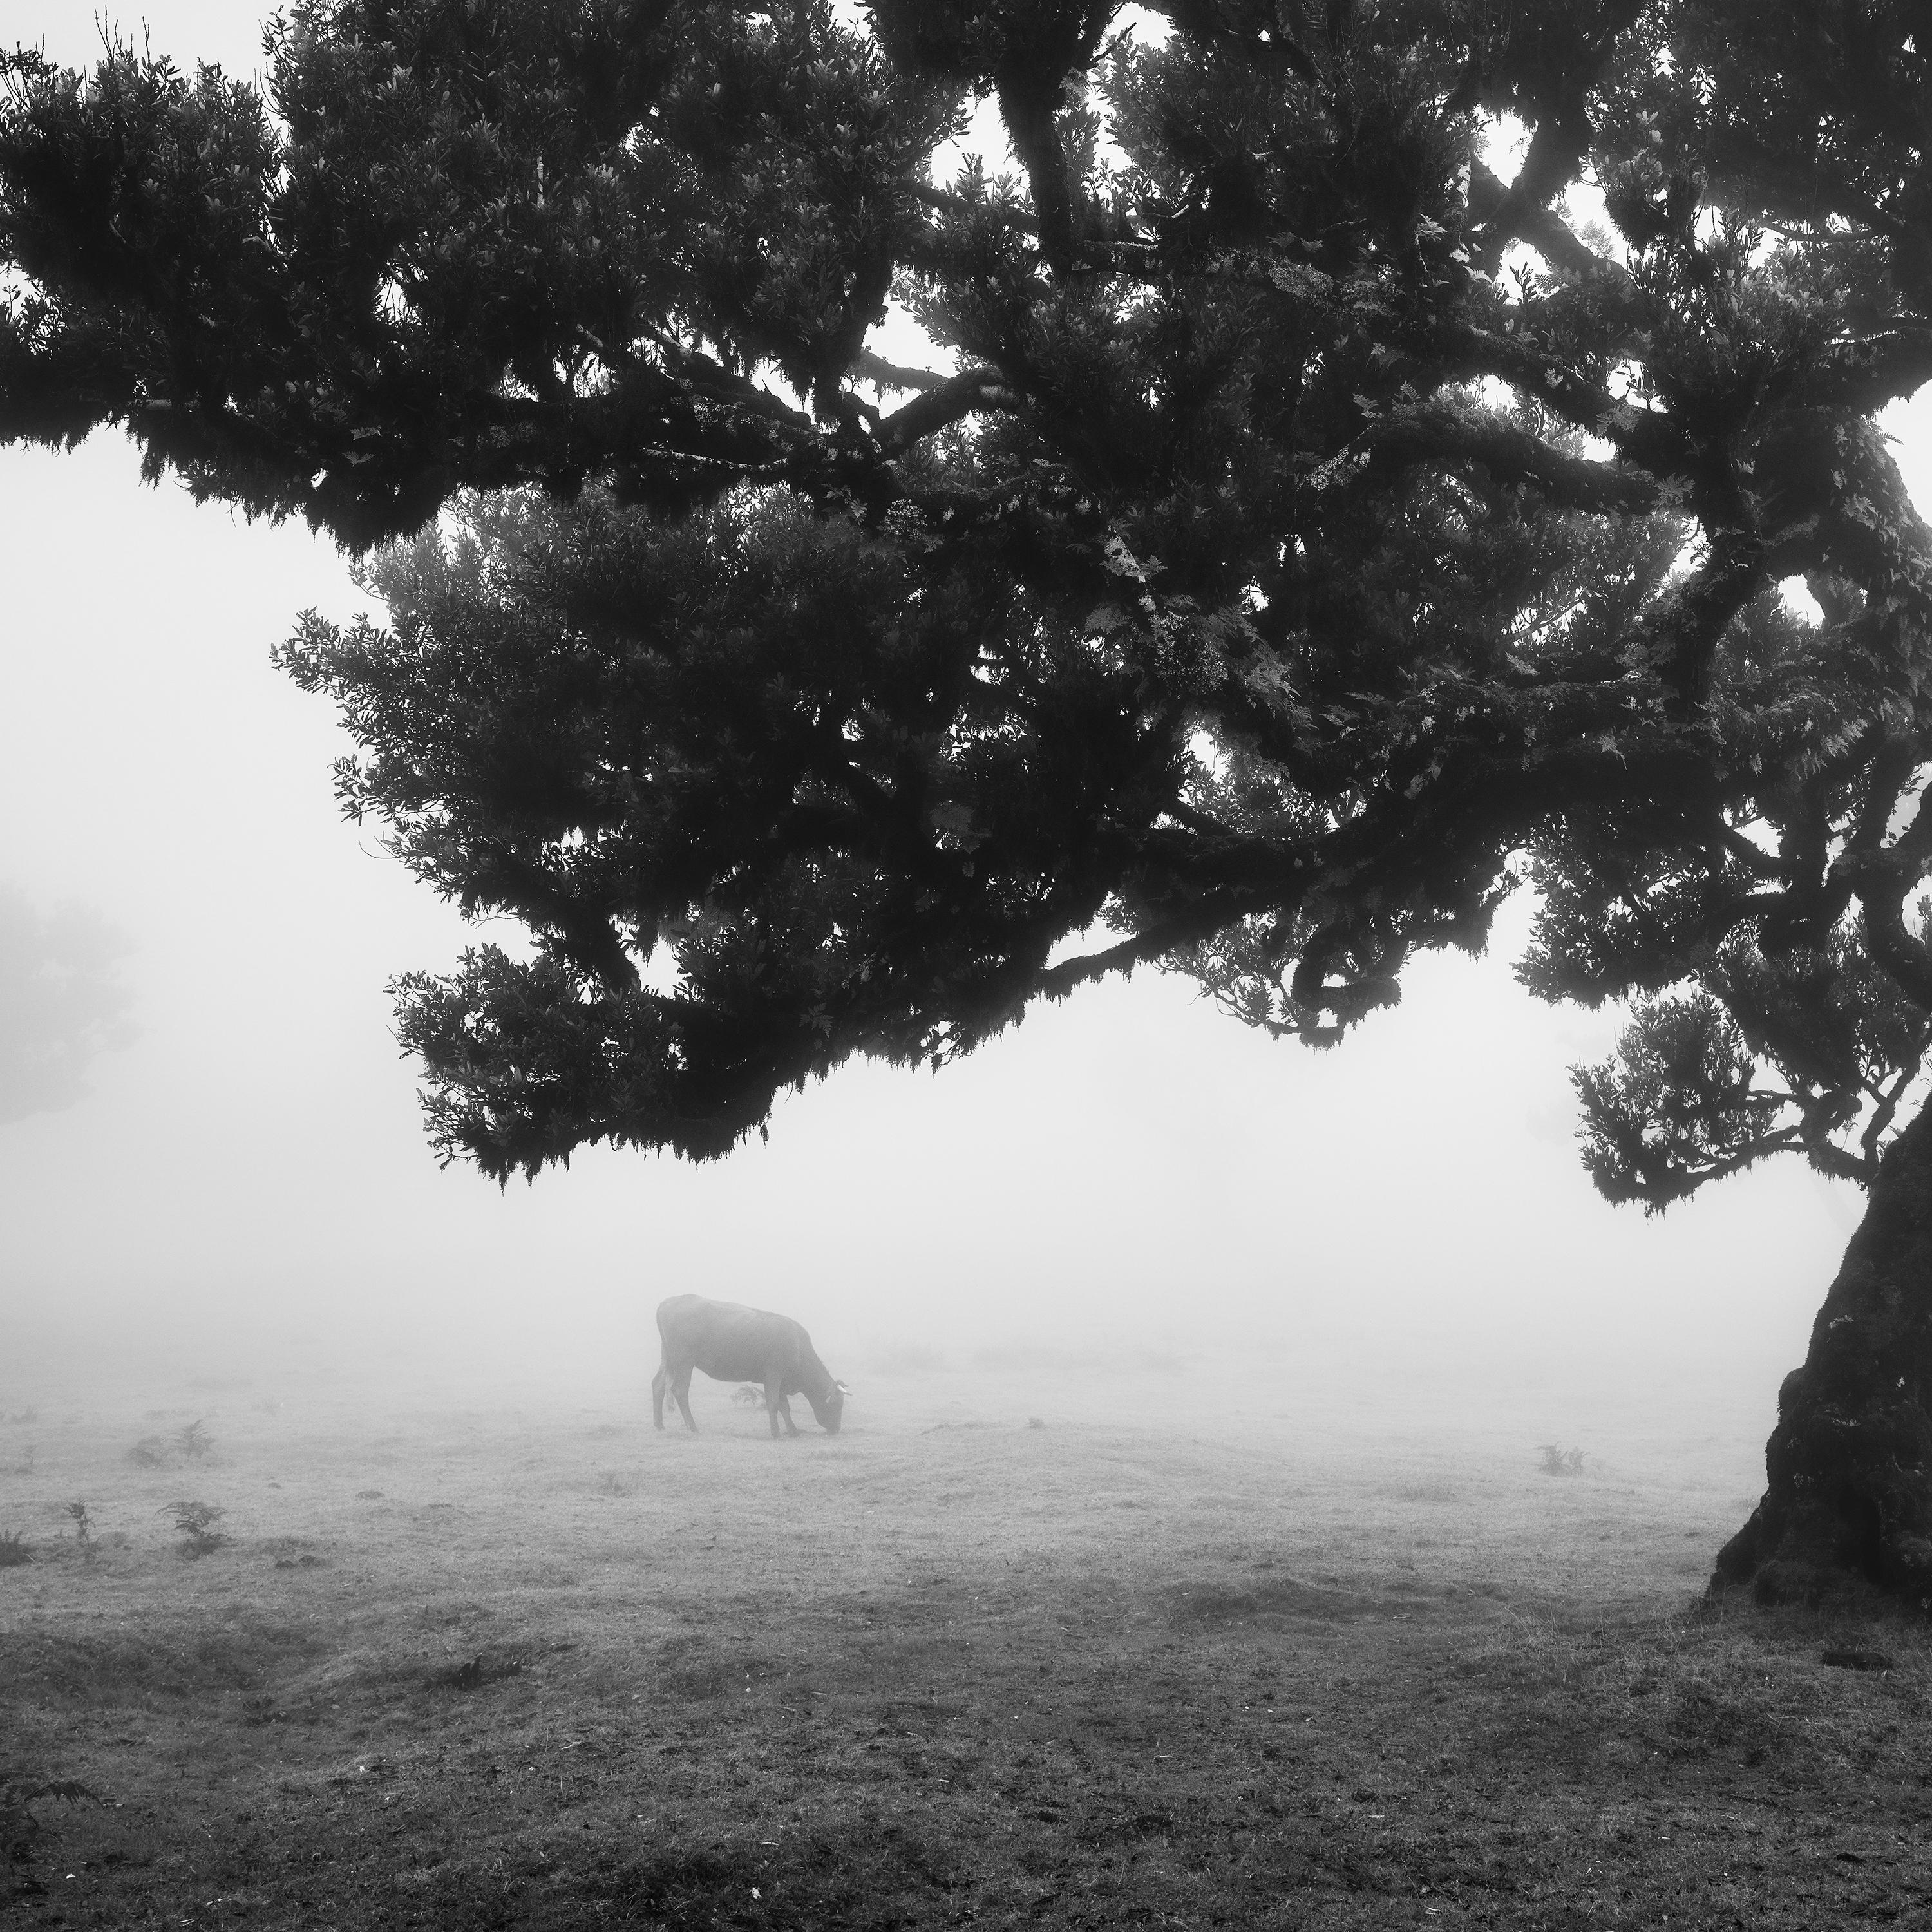 Cows on the foggy Pasture, Portugal, black and white photography, art landscape For Sale 5